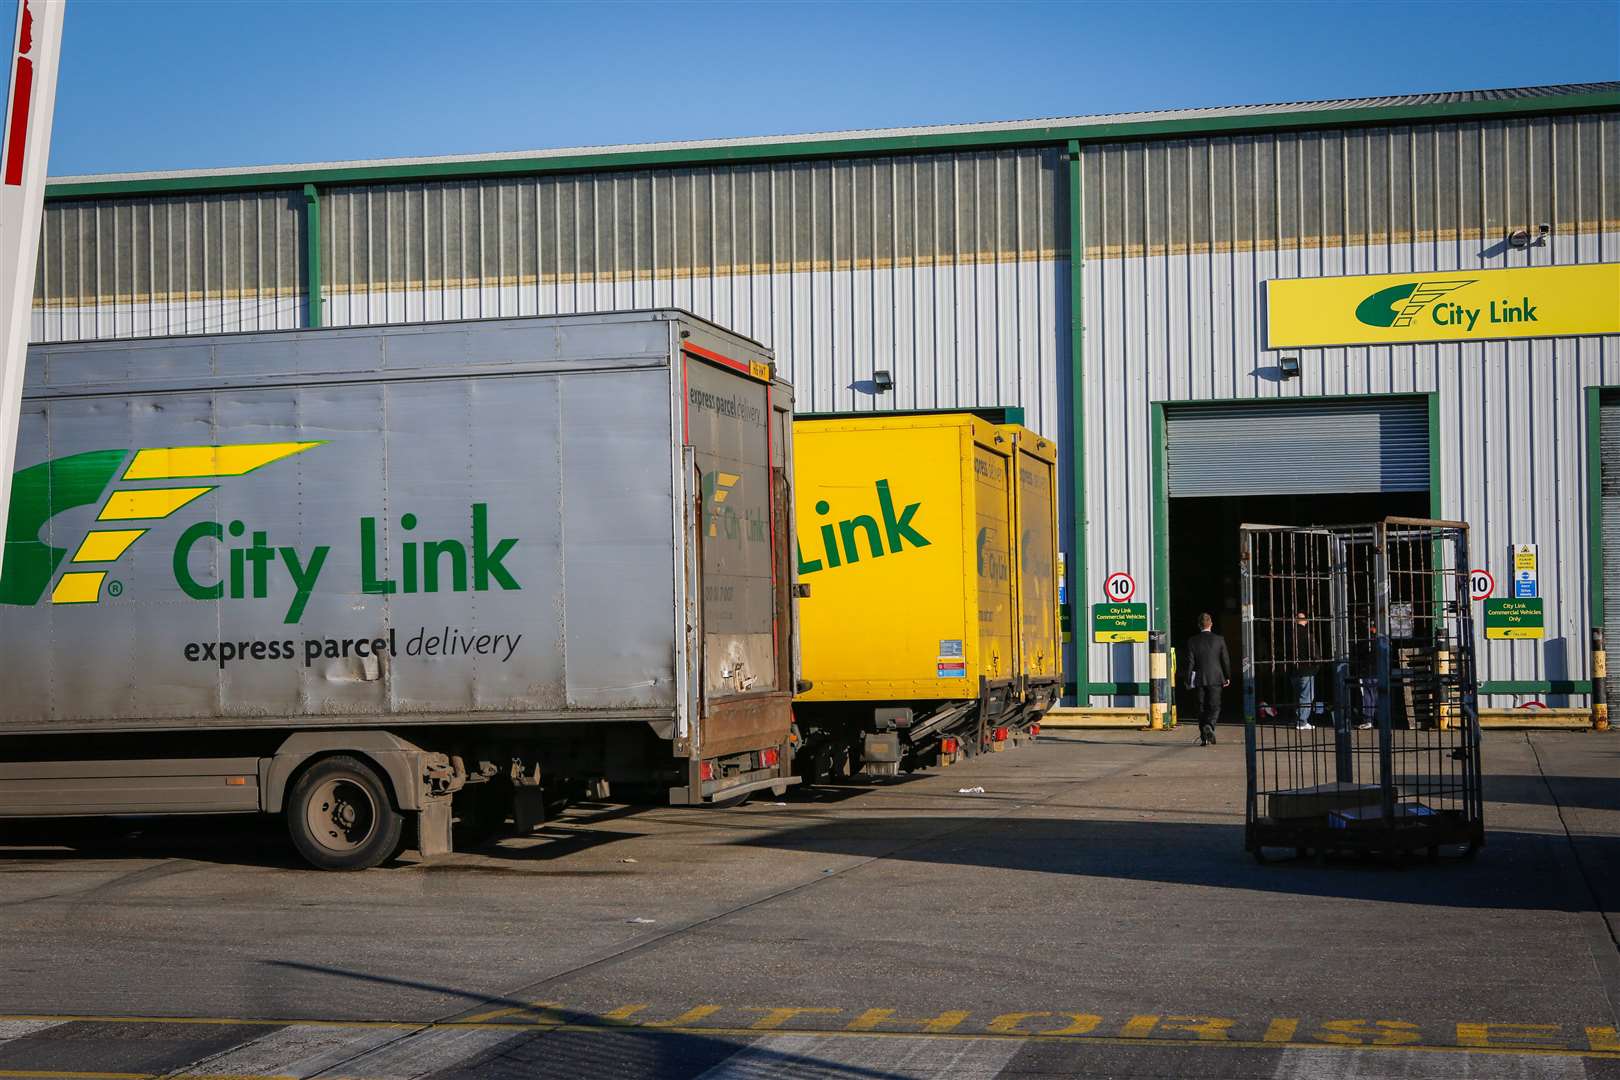 The City Link depot in Larkfield